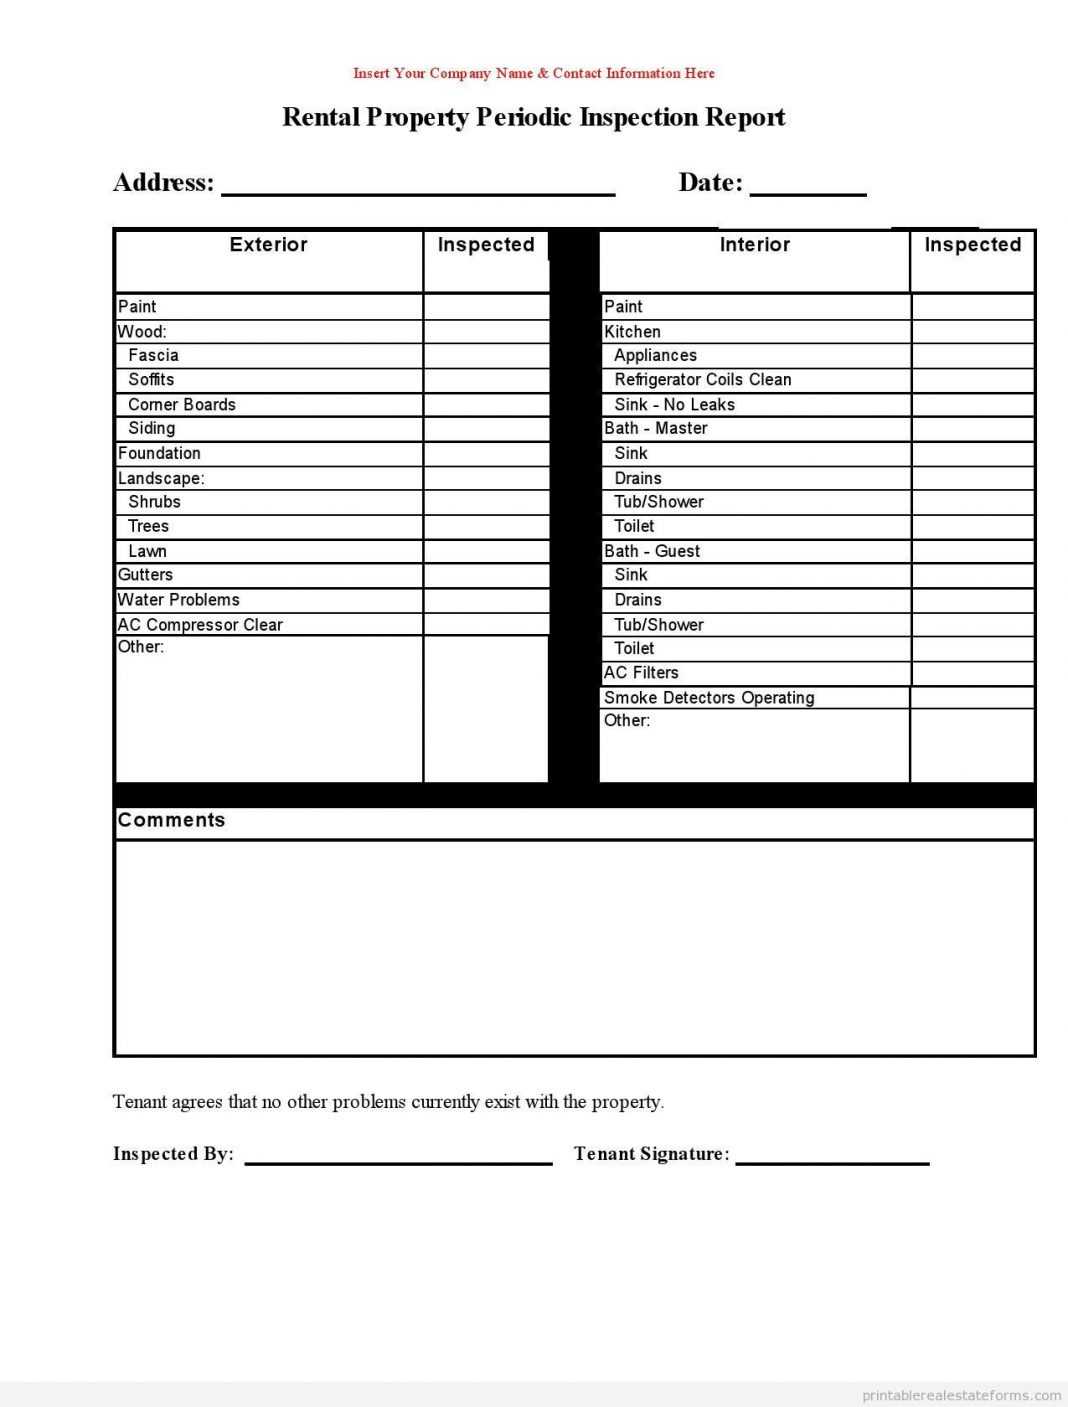 Free Printable Rental Property Periodic Inspection Report With Home Inspection Report Template Free